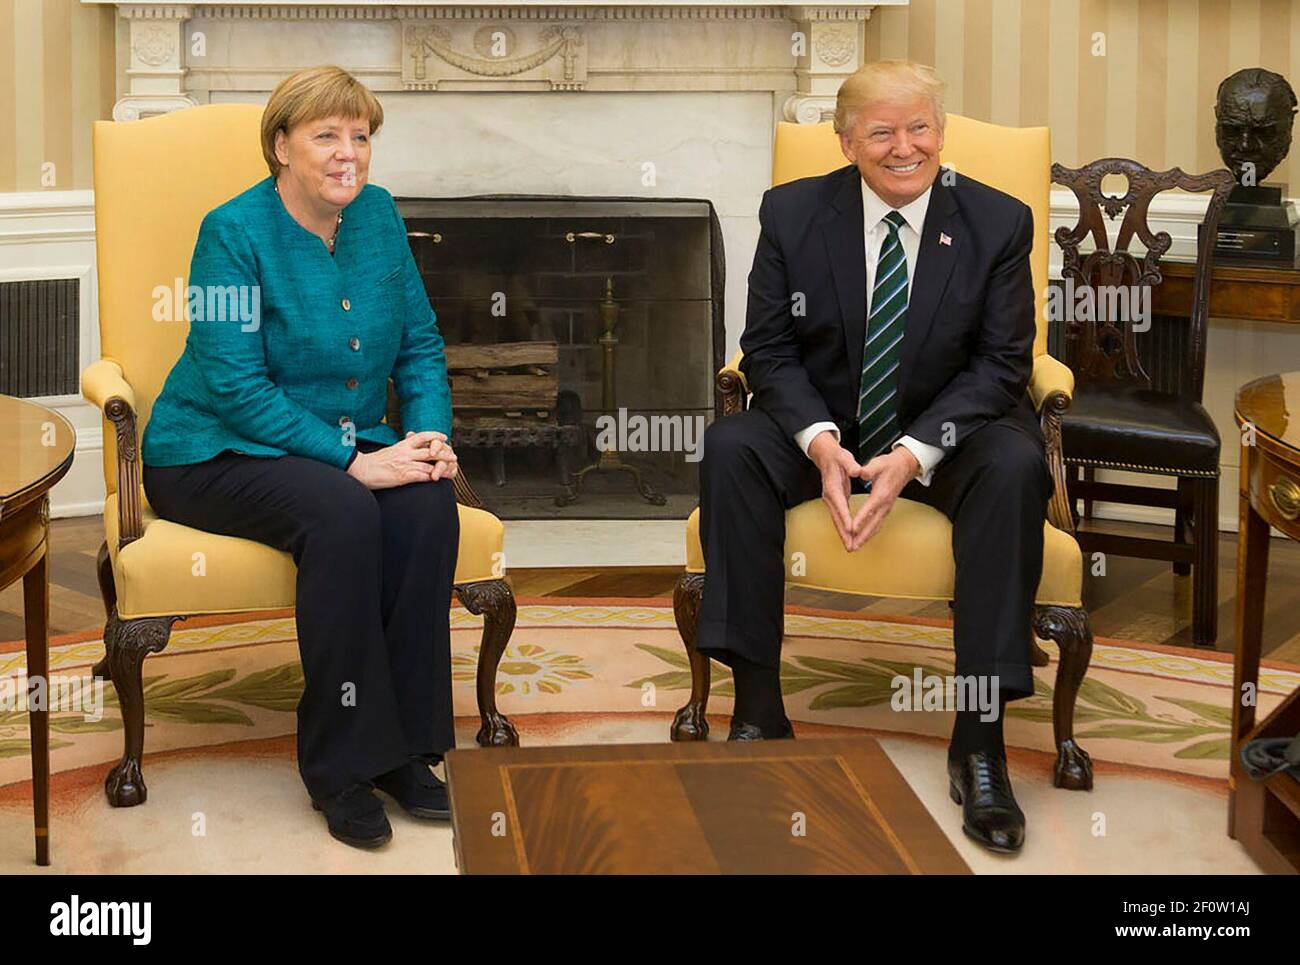 President Donald Trump meets with German Chancellor Angela Merkel Friday March 17 2017 in the Oval Office of the White House in Washington D.C. Stock Photo